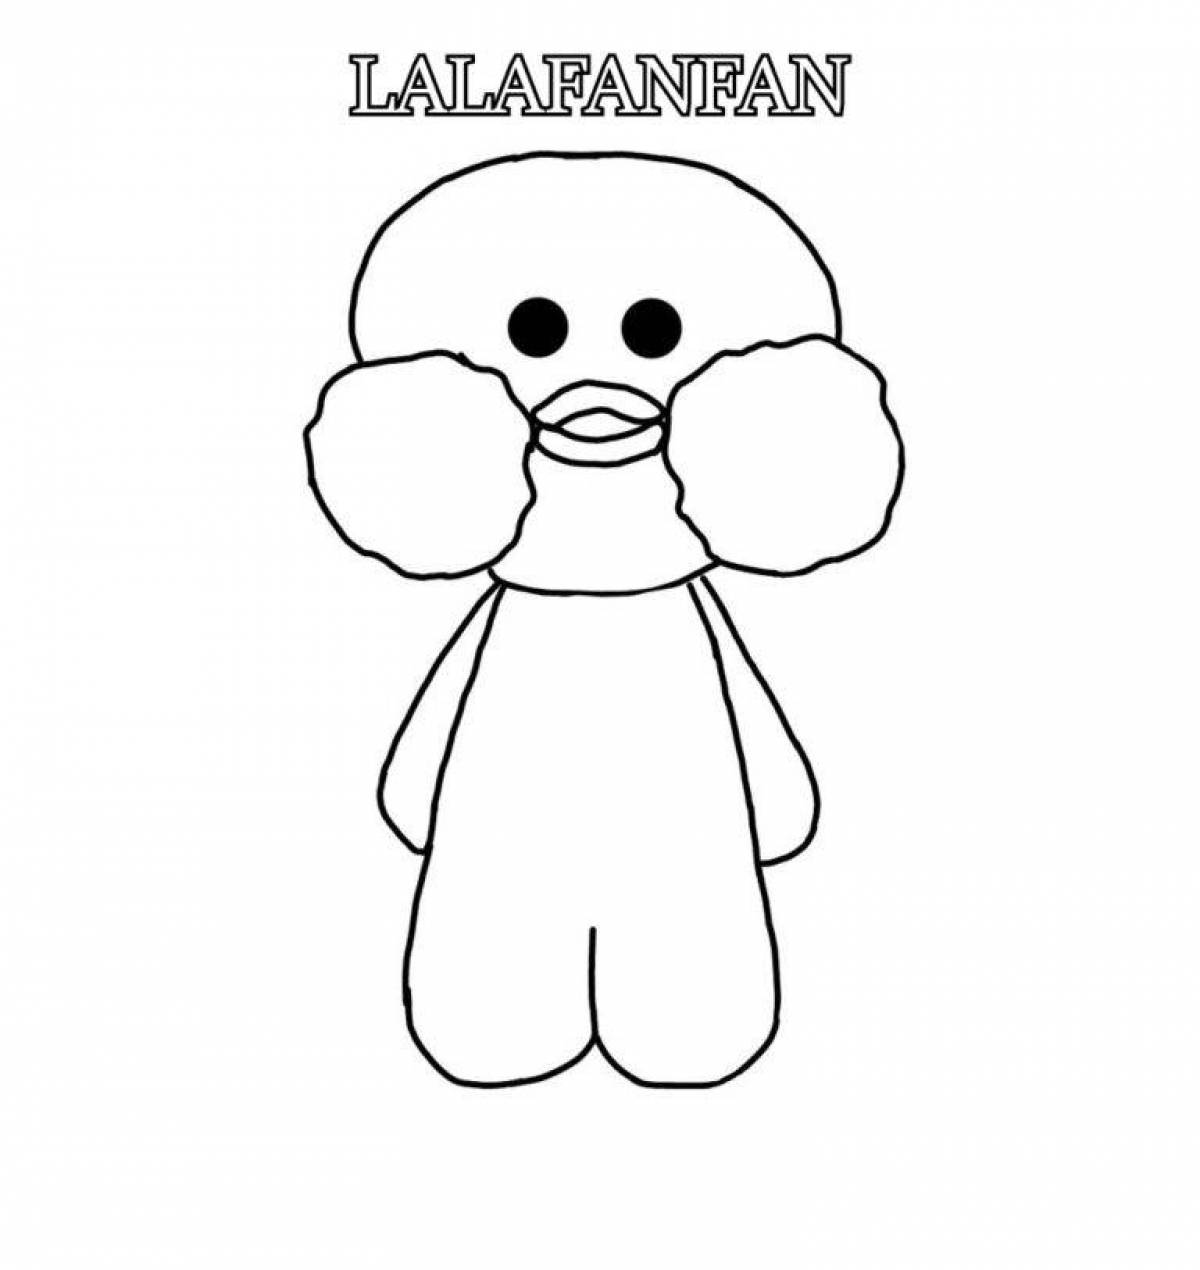 Animated lalafanfan duck with clothes